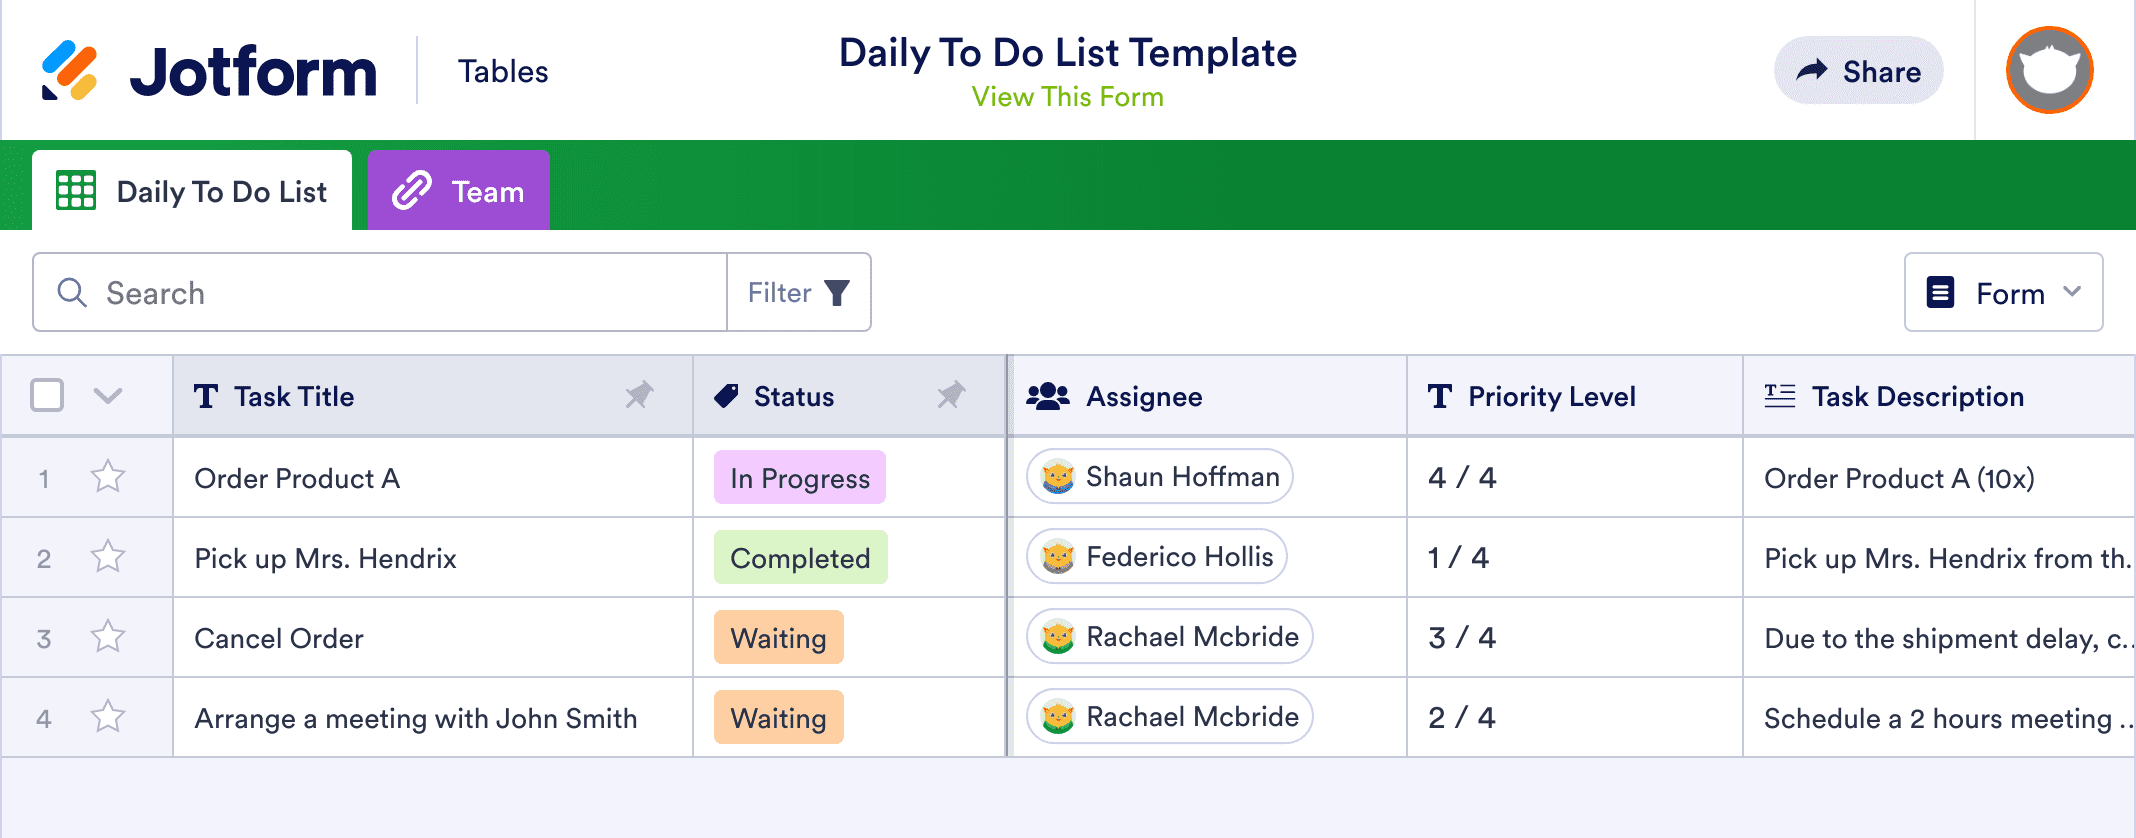 Daily To Do List Template Jotform Tables